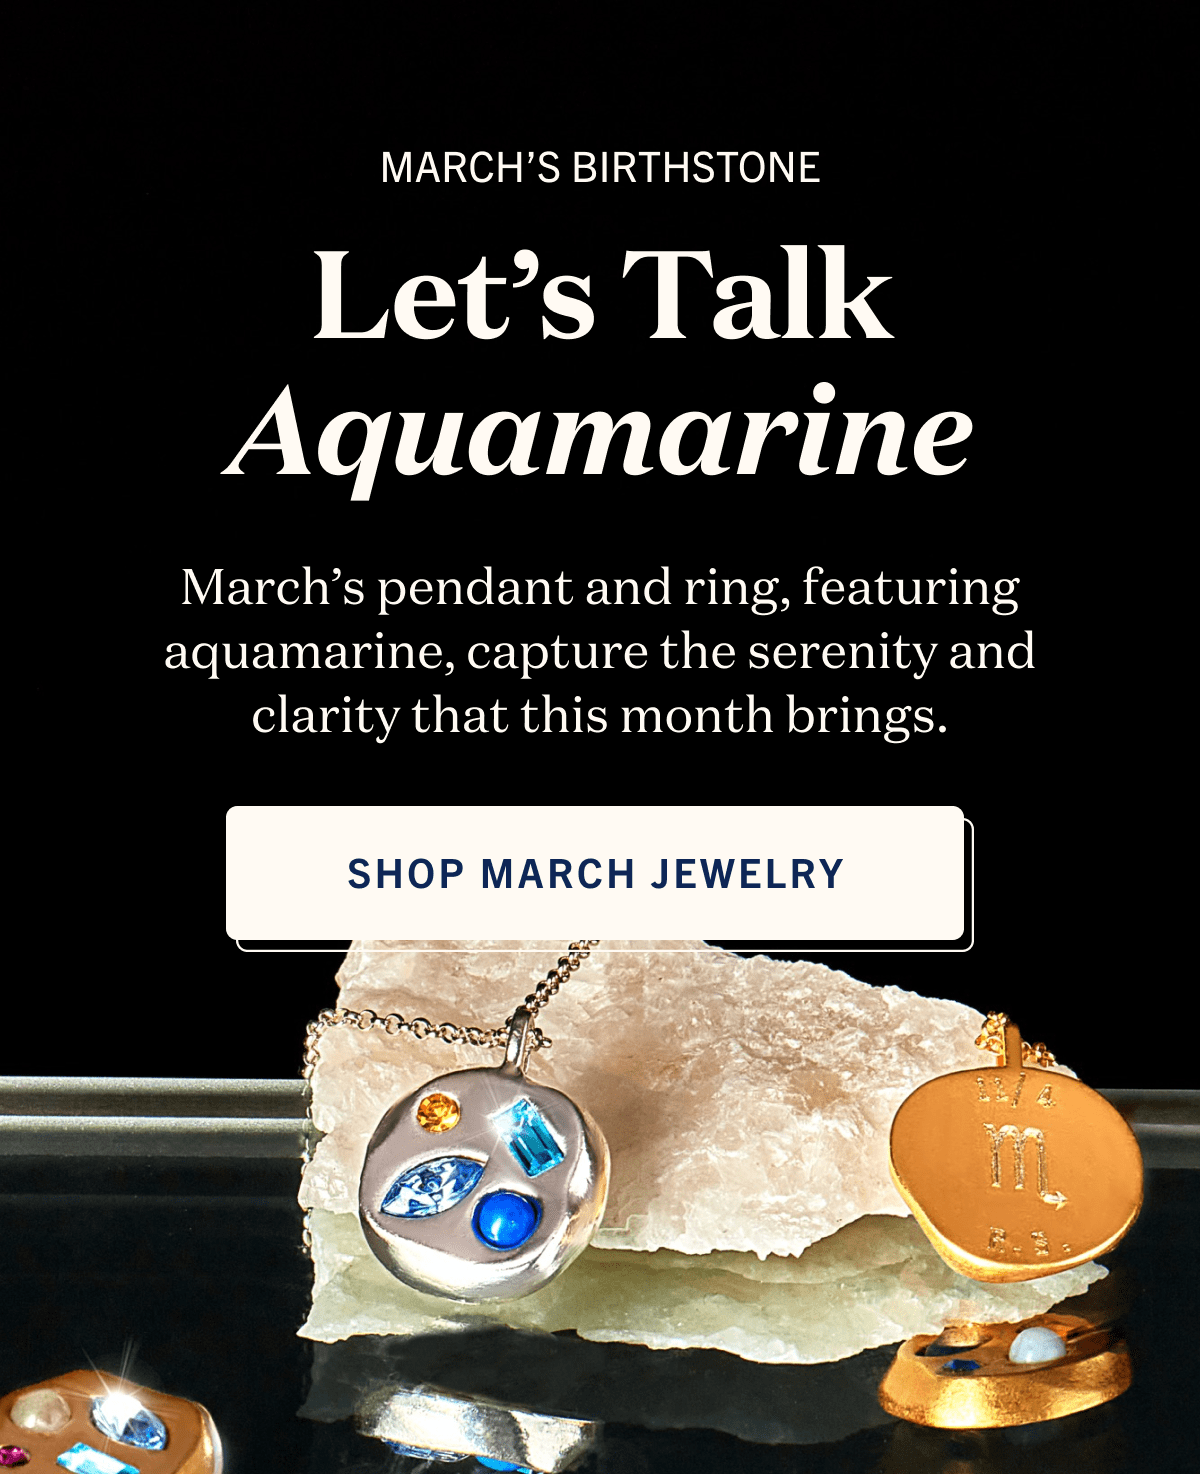 Shop March jewelry